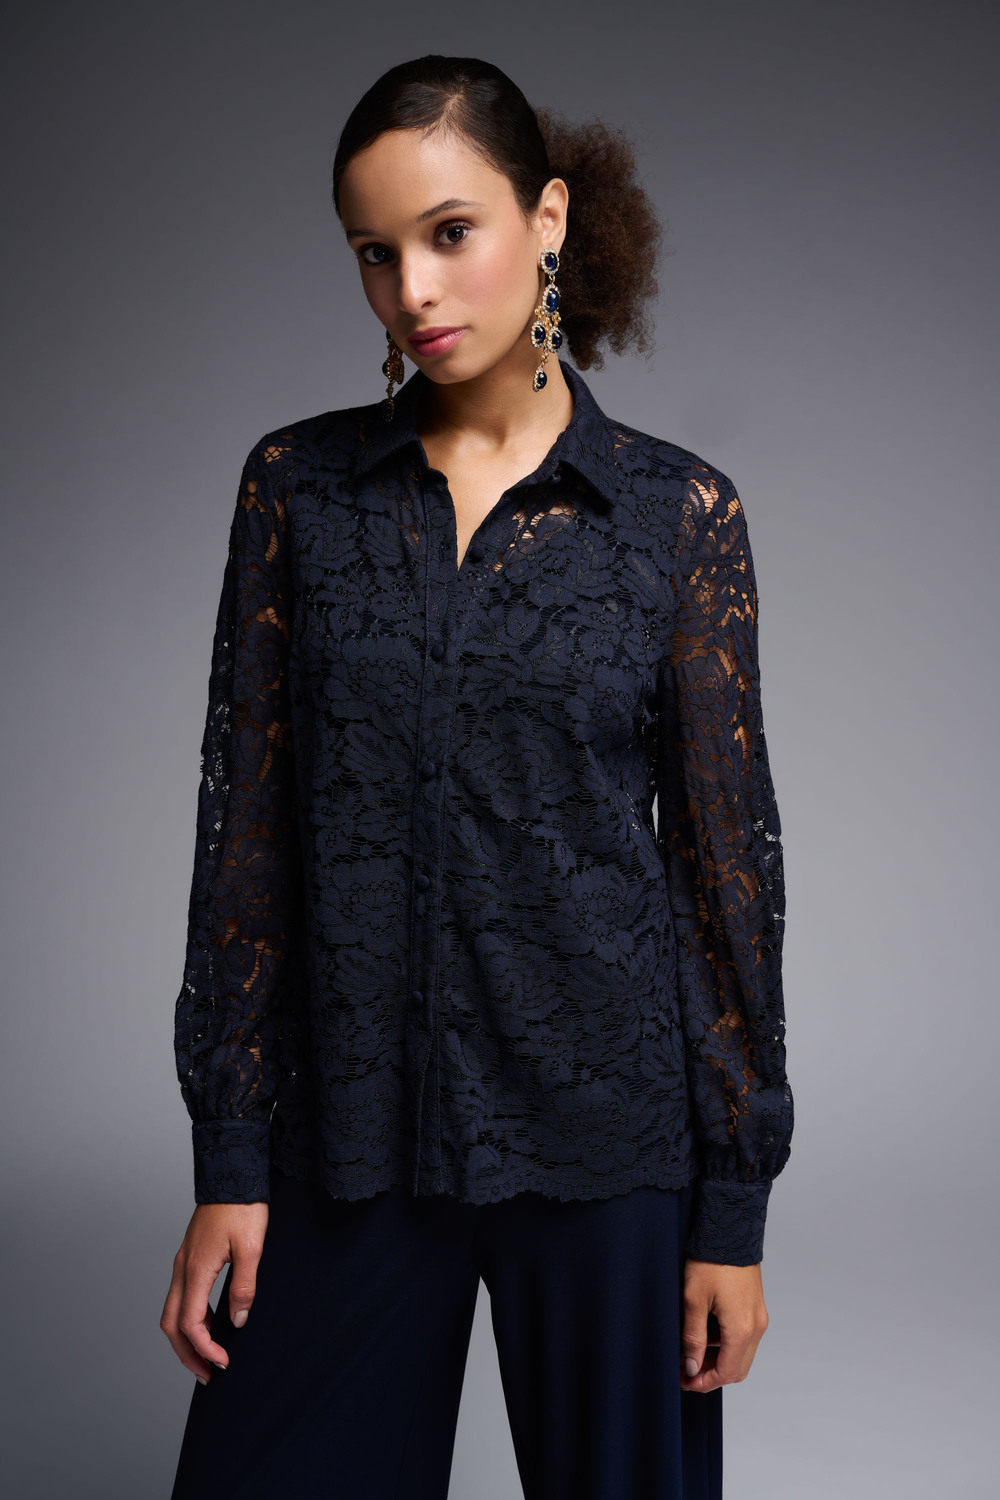 Lace Detail Blouse Style 231764. Midnight Blue